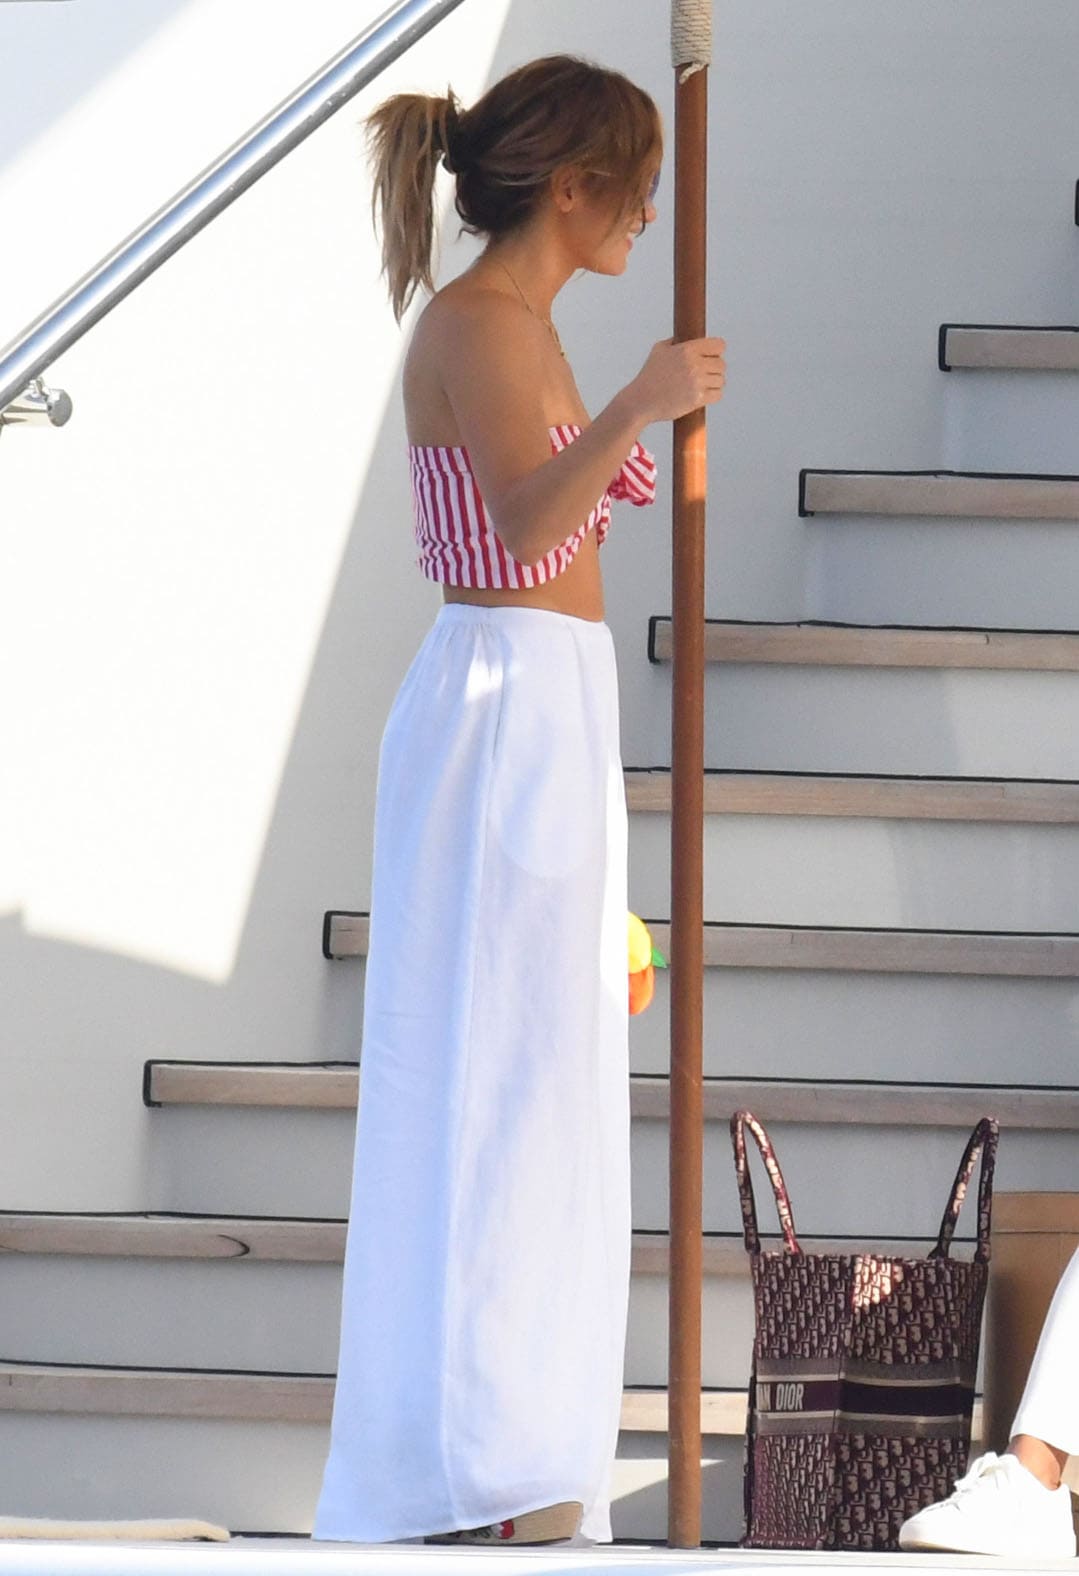 Jennifer Lopez pairs her bandeau top with flowing white pants